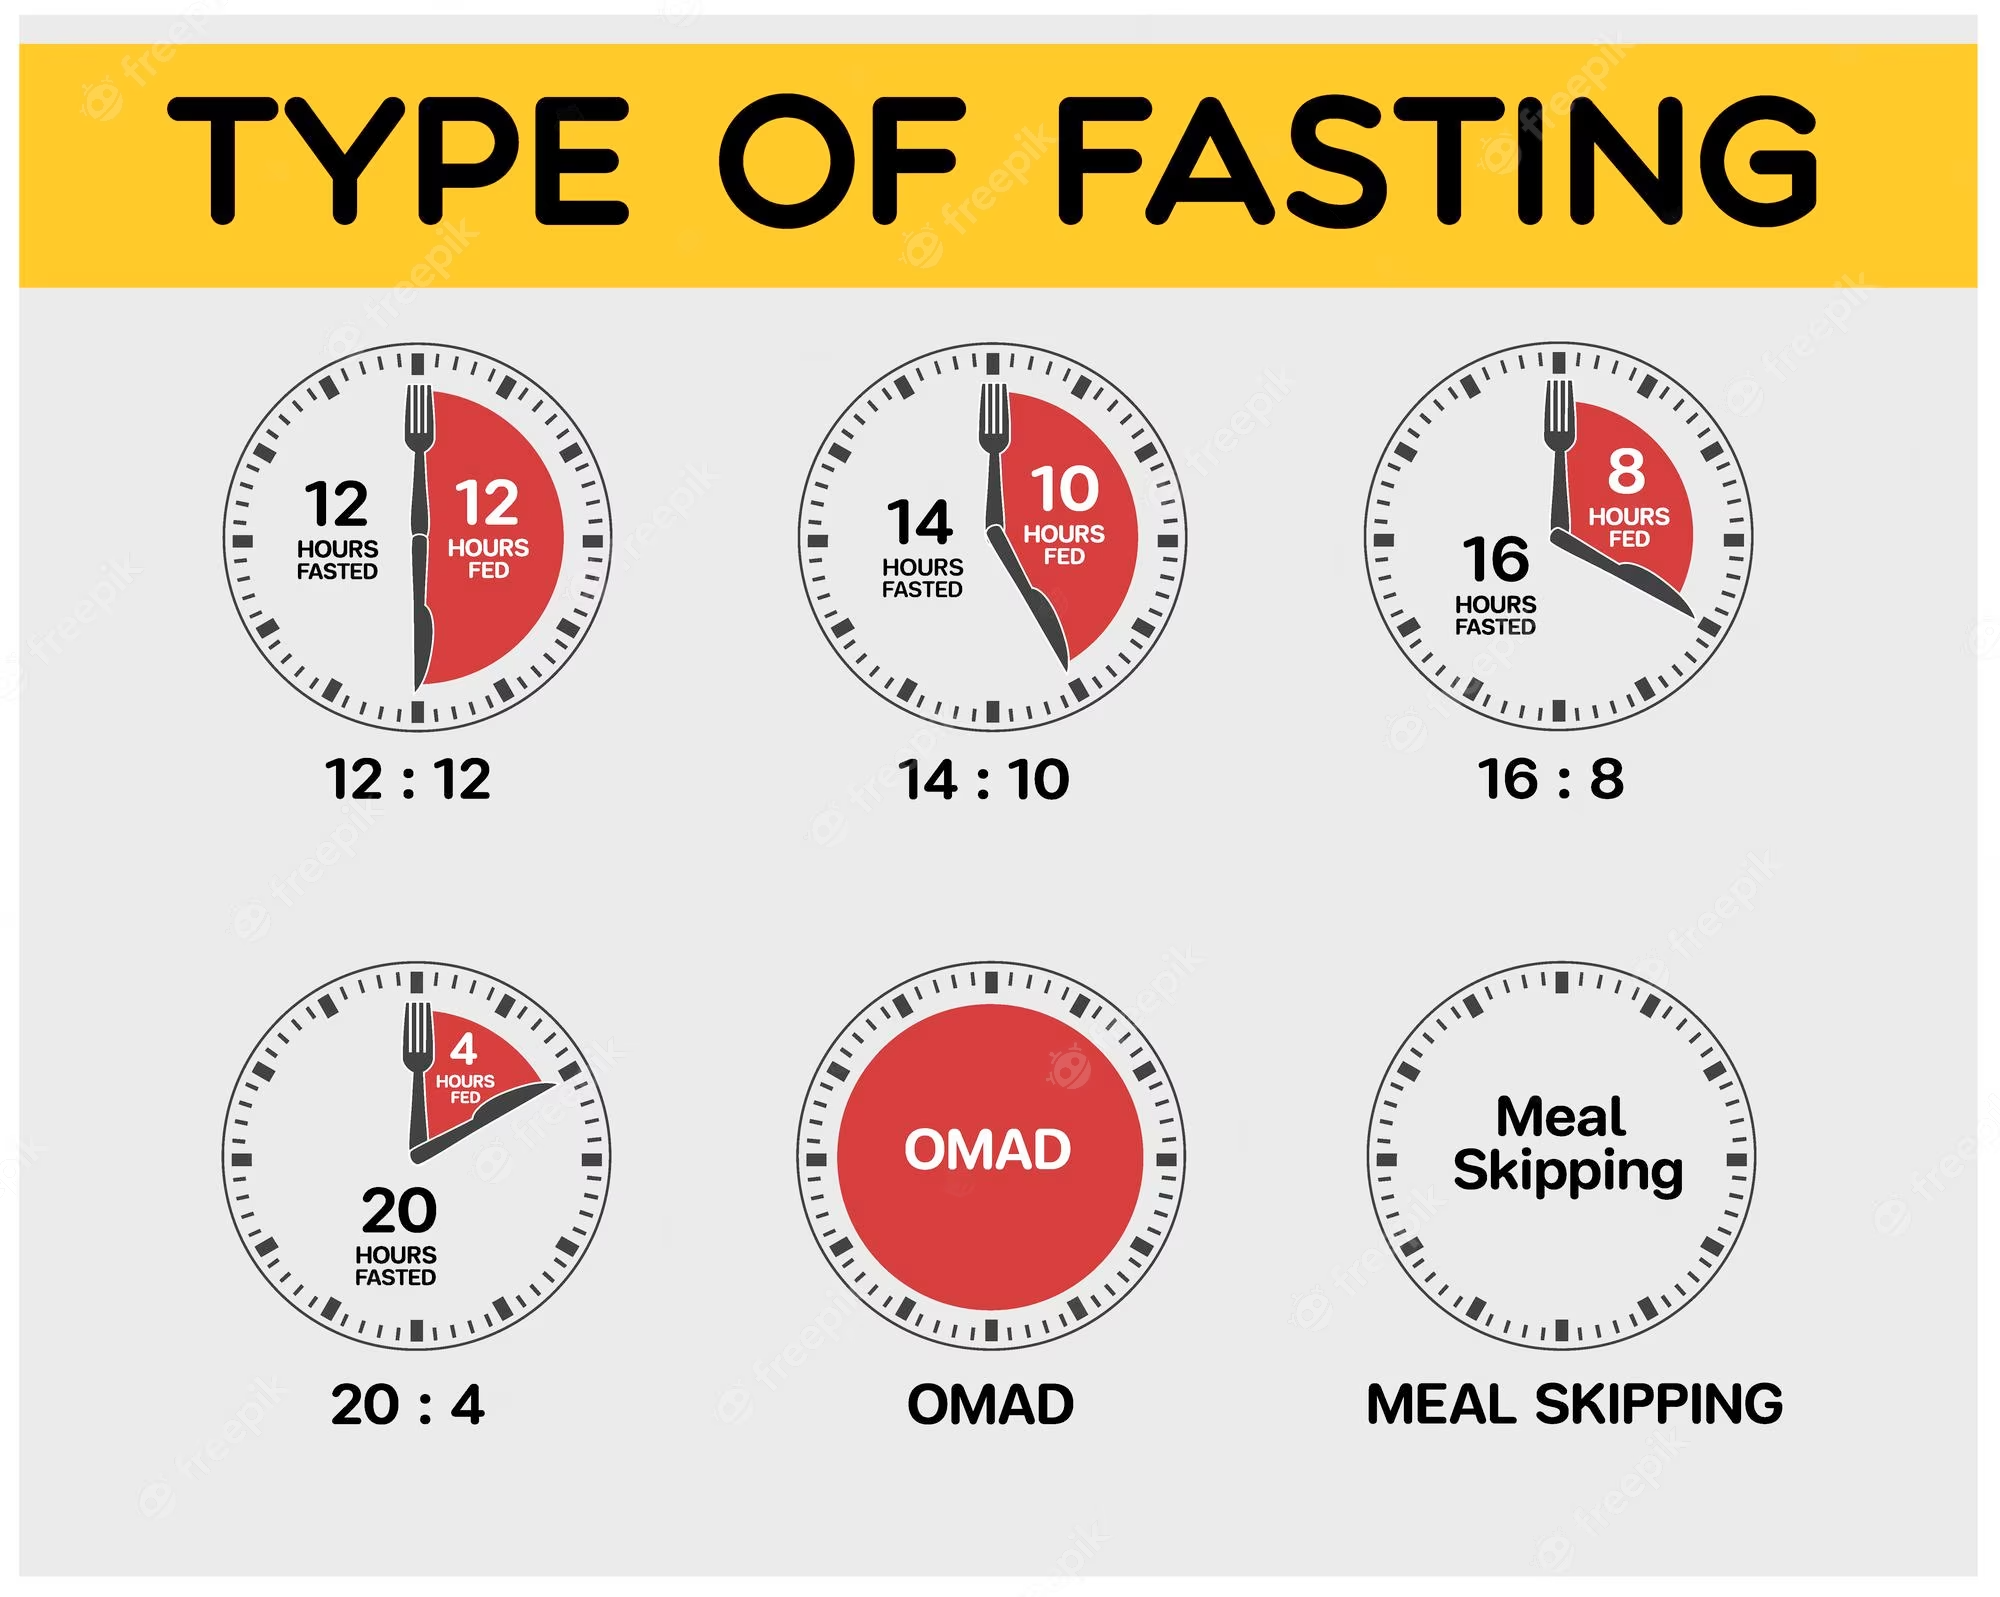 Types of Fasting Chart | The Guy Blog